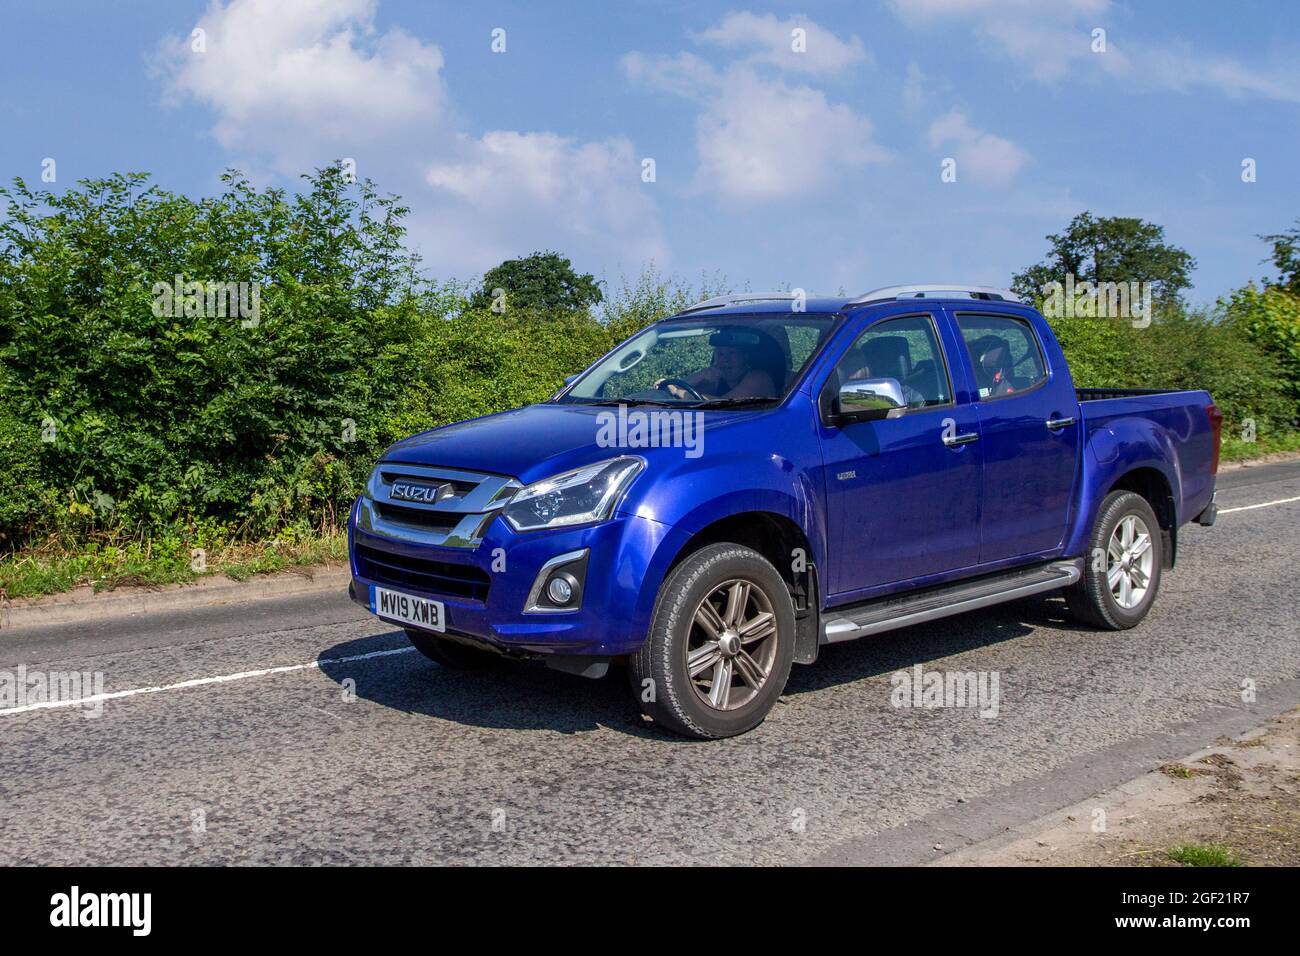 2019 blue Isuzu D-Max Utah V-Cross 6 speed manual 1898 cc Diesel Pick-up en-route to Capesthorne Hall classic July car show, Cheshire, UK Stock Photo